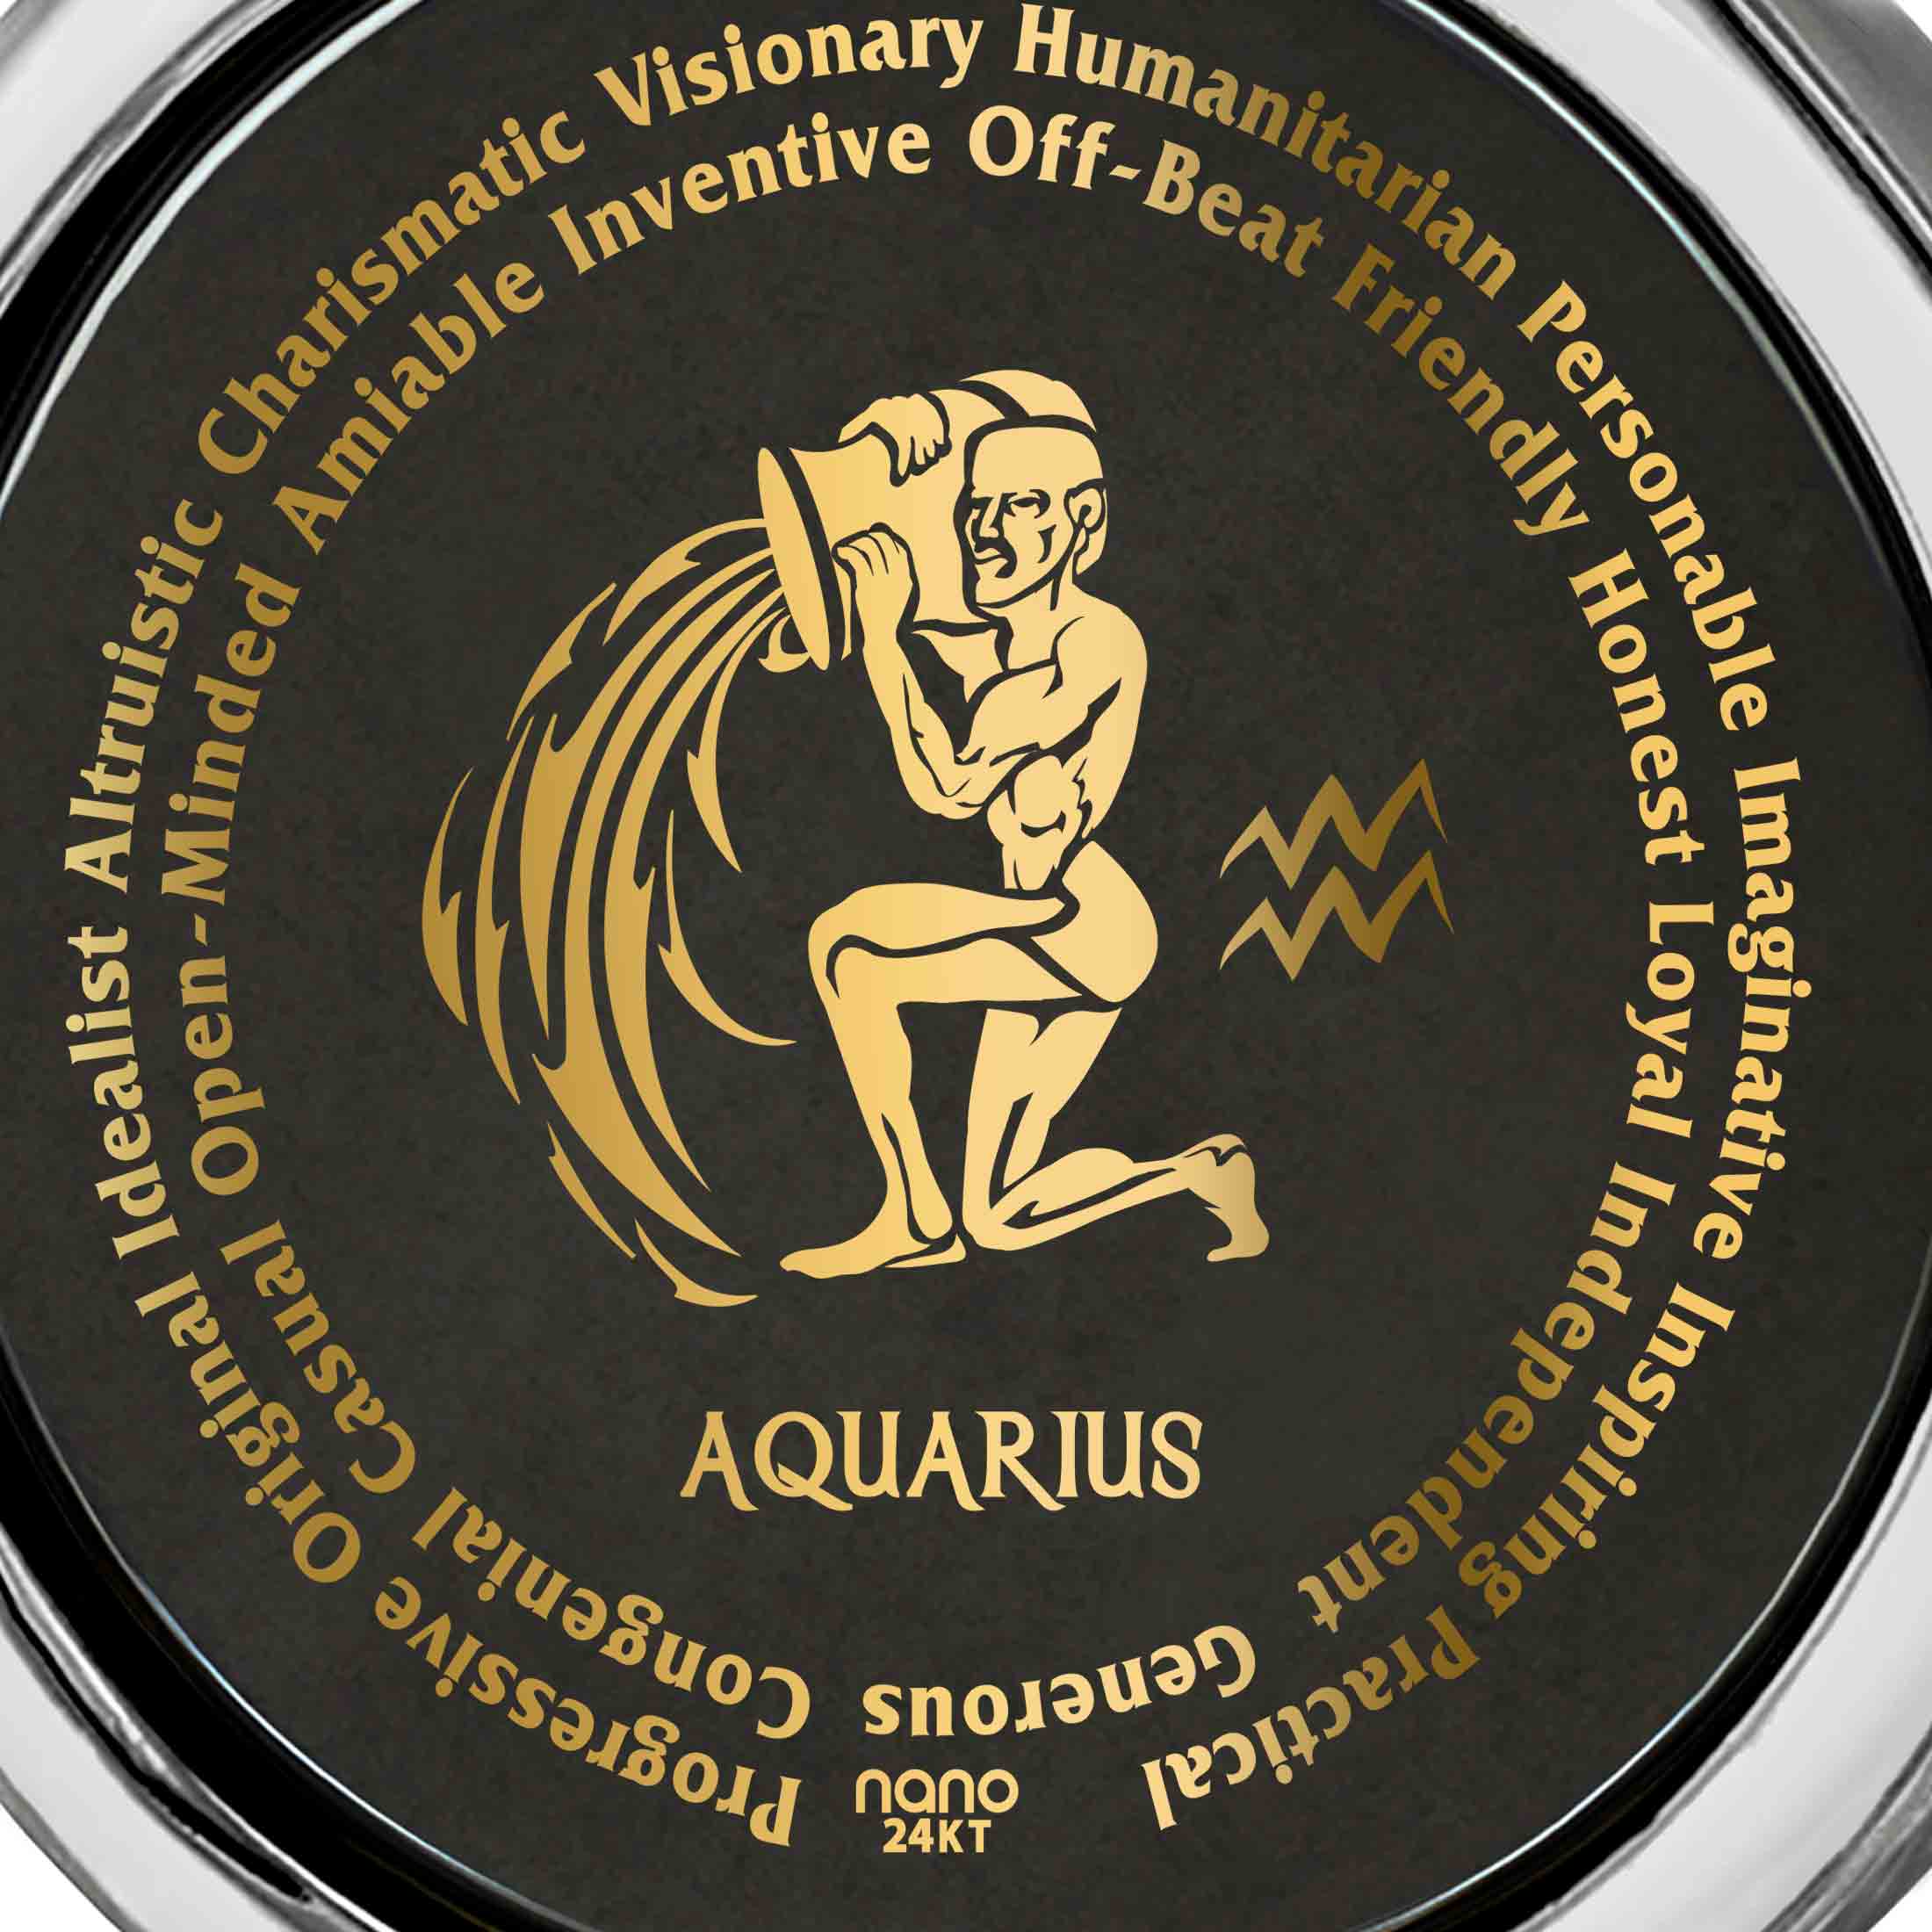 Circular Aquarius necklace featuring the Aquarius Necklaces for Lovers of the Zodiac with descriptive text and an emblem, hanging from a silver chain, accompanied by a tag.